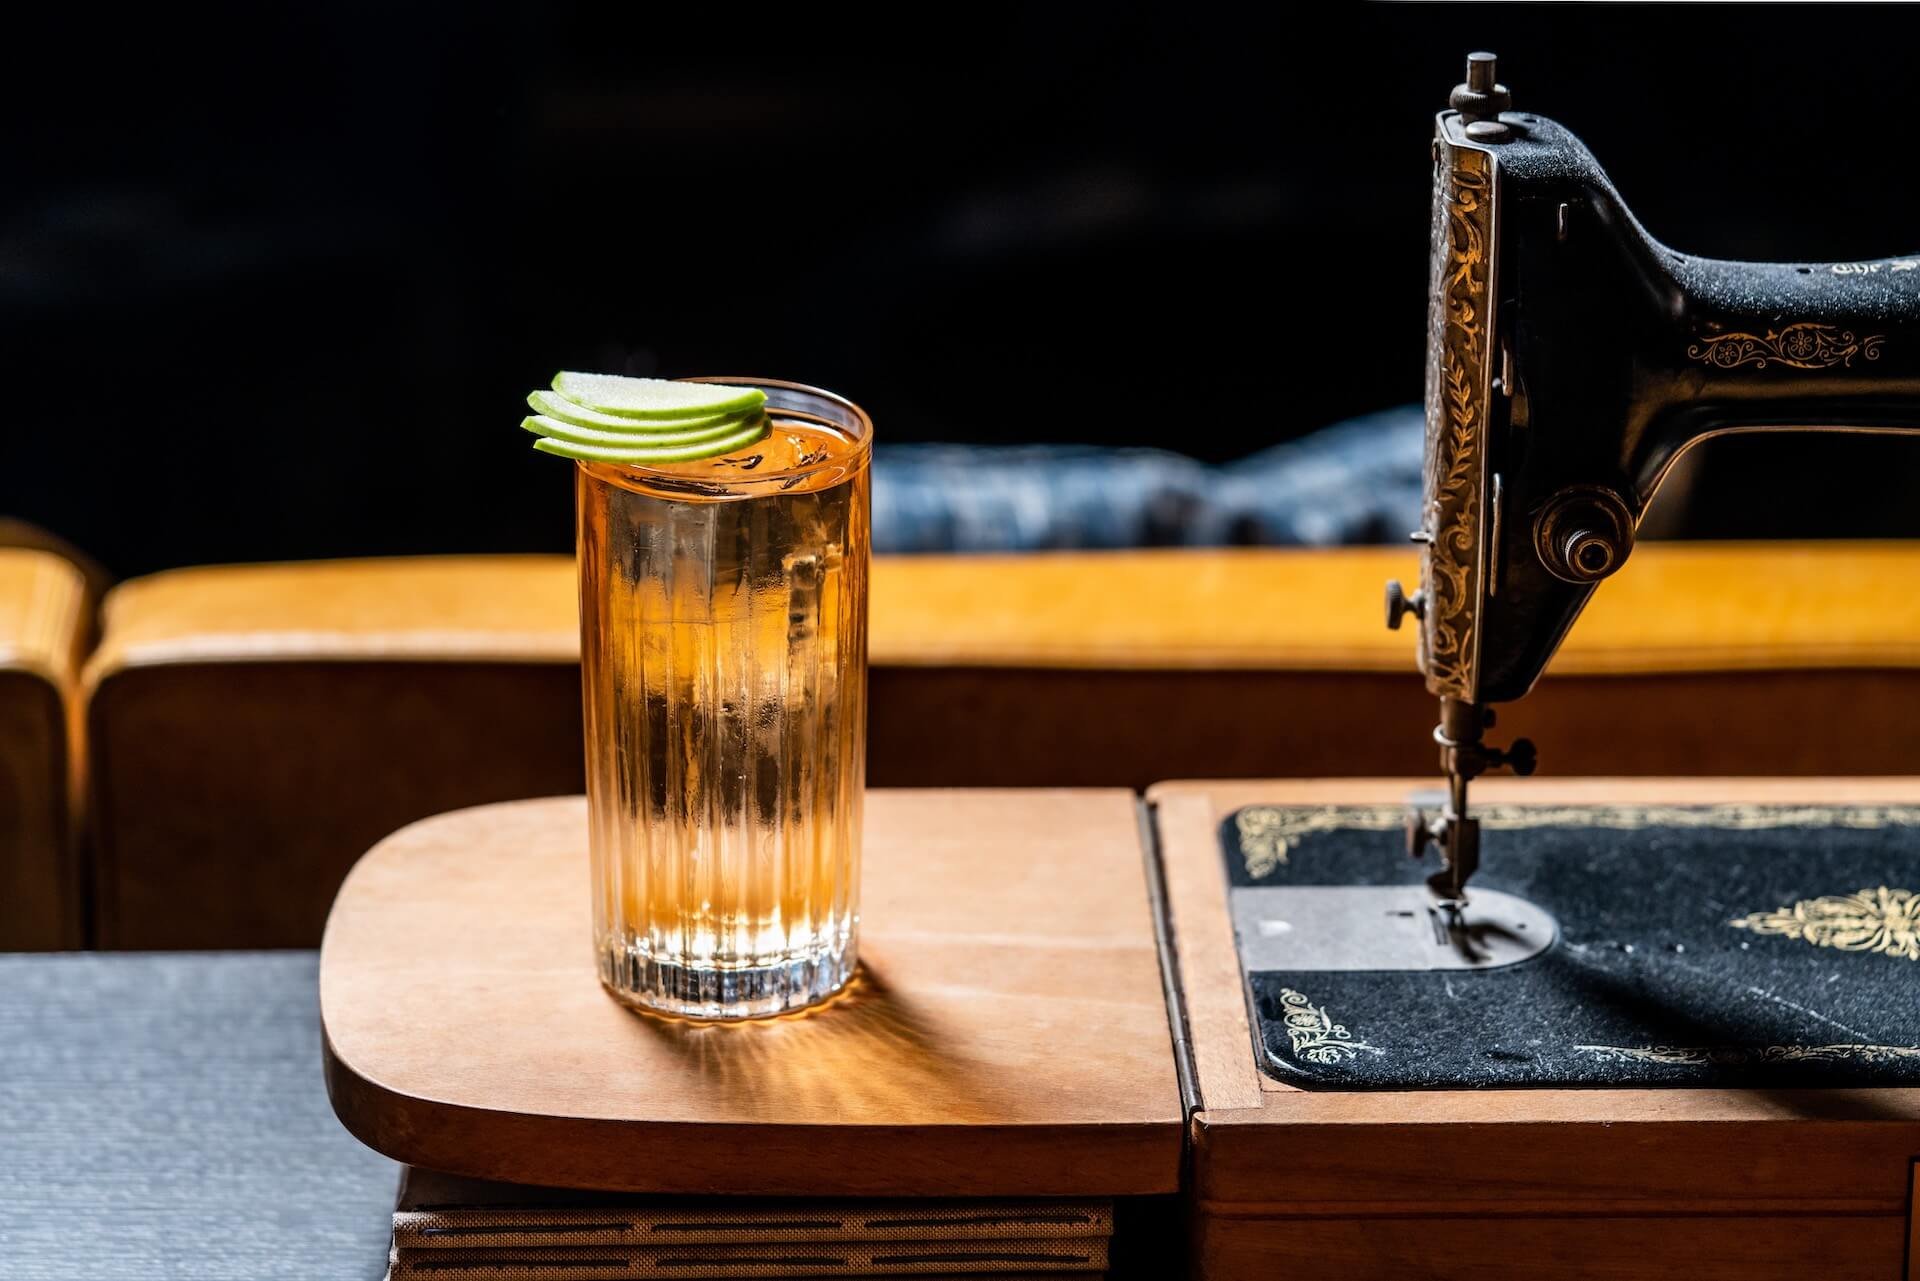 Anantara_Grand_Hotel_Krasnapolsky_Amsterdam_Bar_The_Tailor_long_glass_cocktail_and_sewing_machine.jpeg